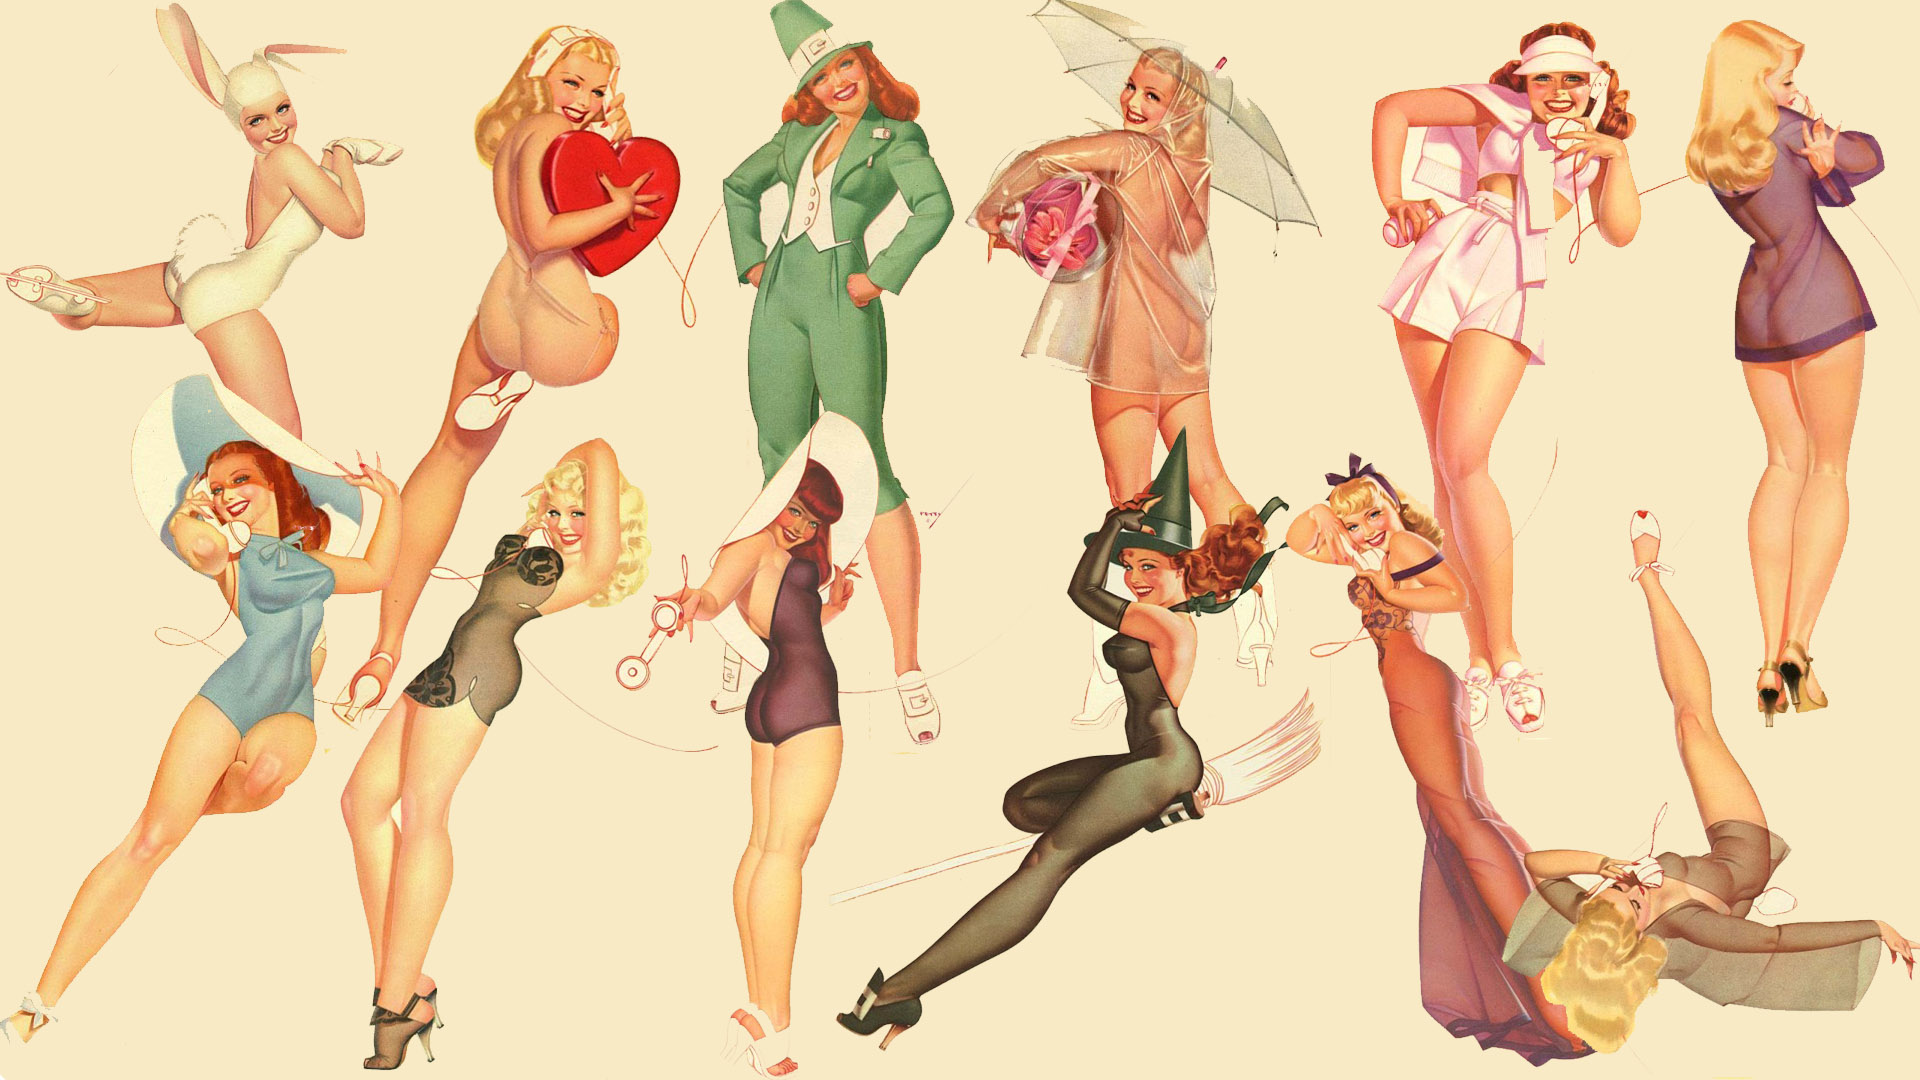 Best Pin Up Girls Images On Pinterest Pin Up Art Pin